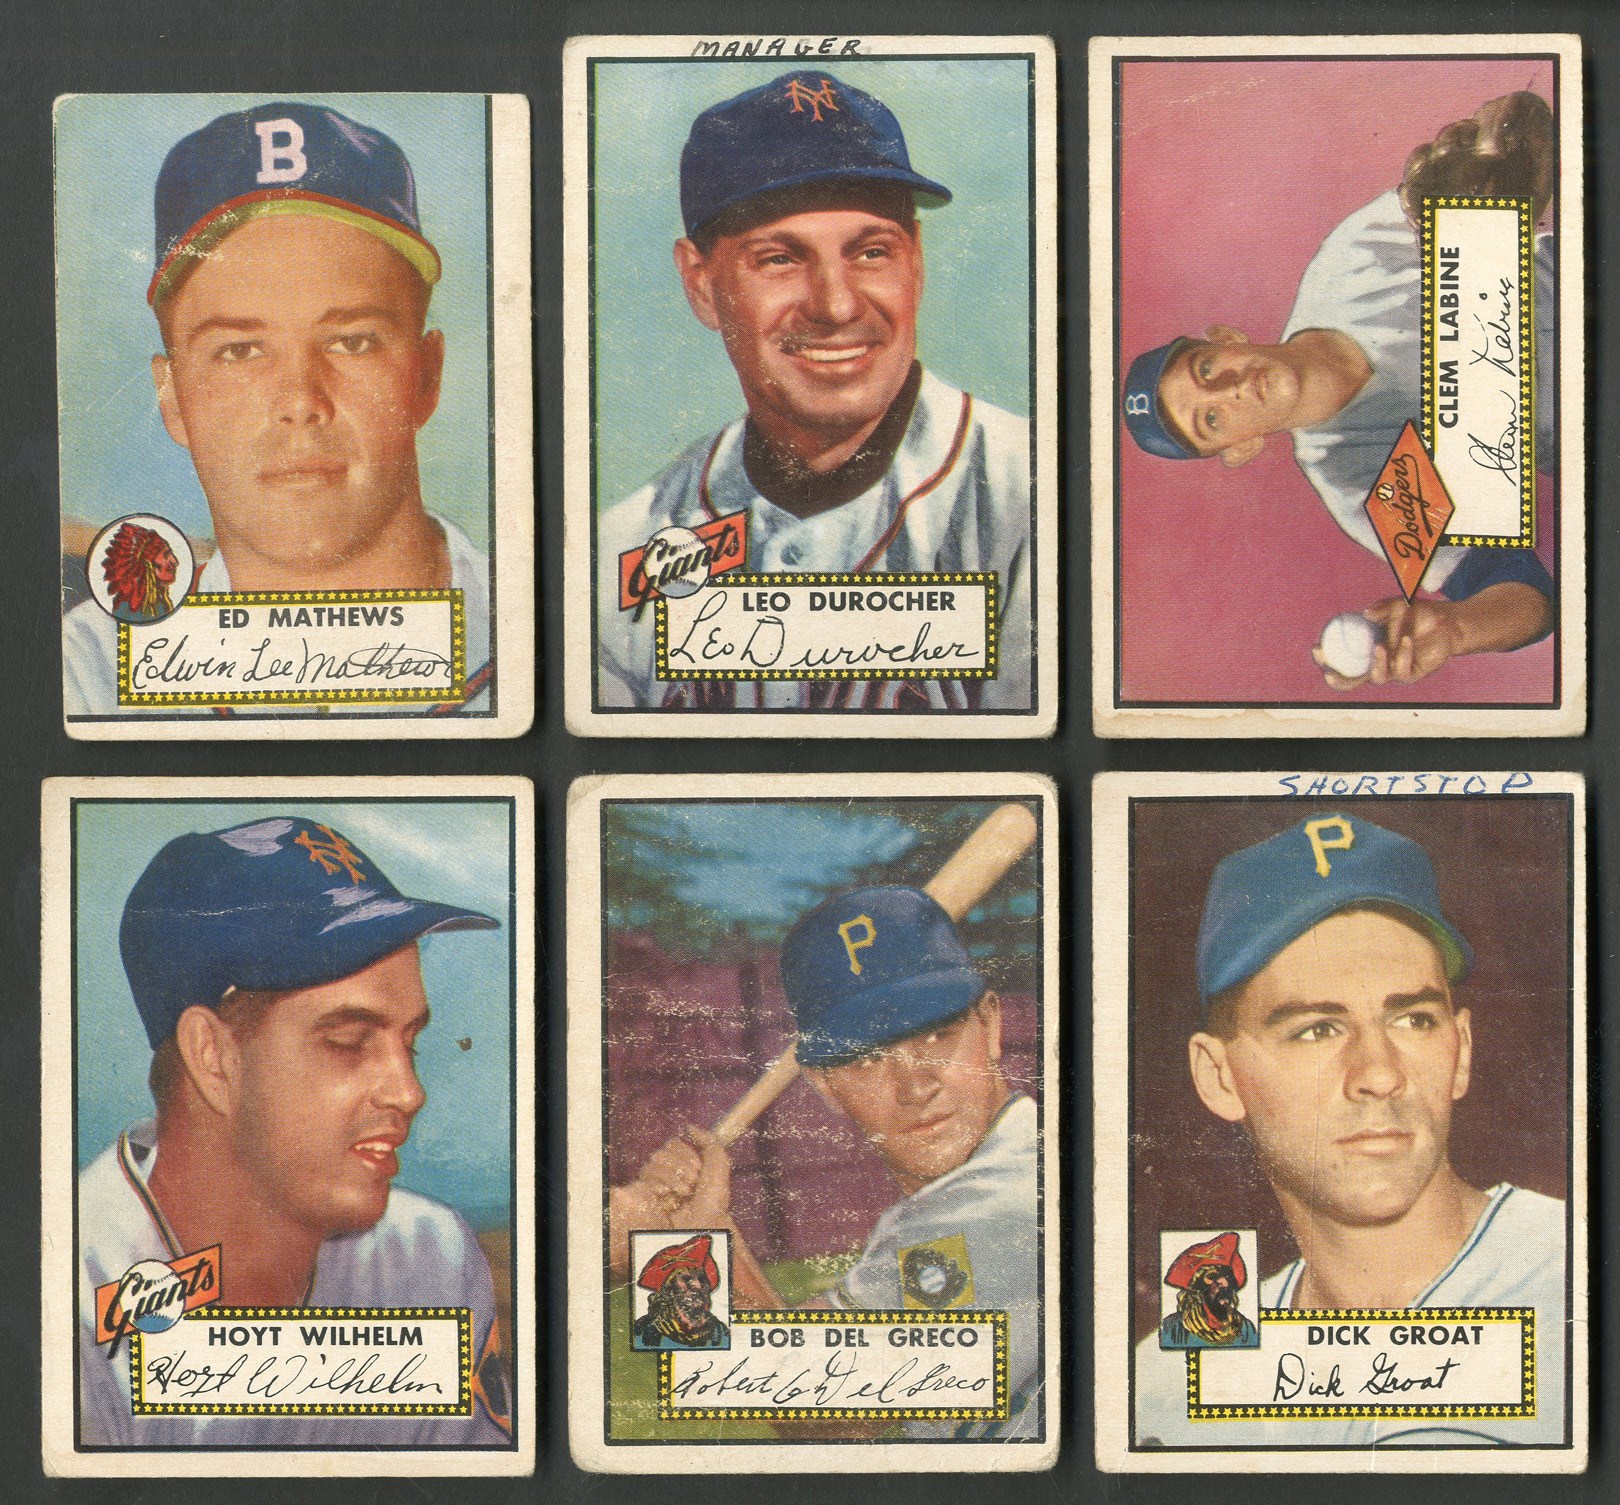 Baseball and Trading Cards - 1952 Topps HIGH NUMBER Collection with Mathews!